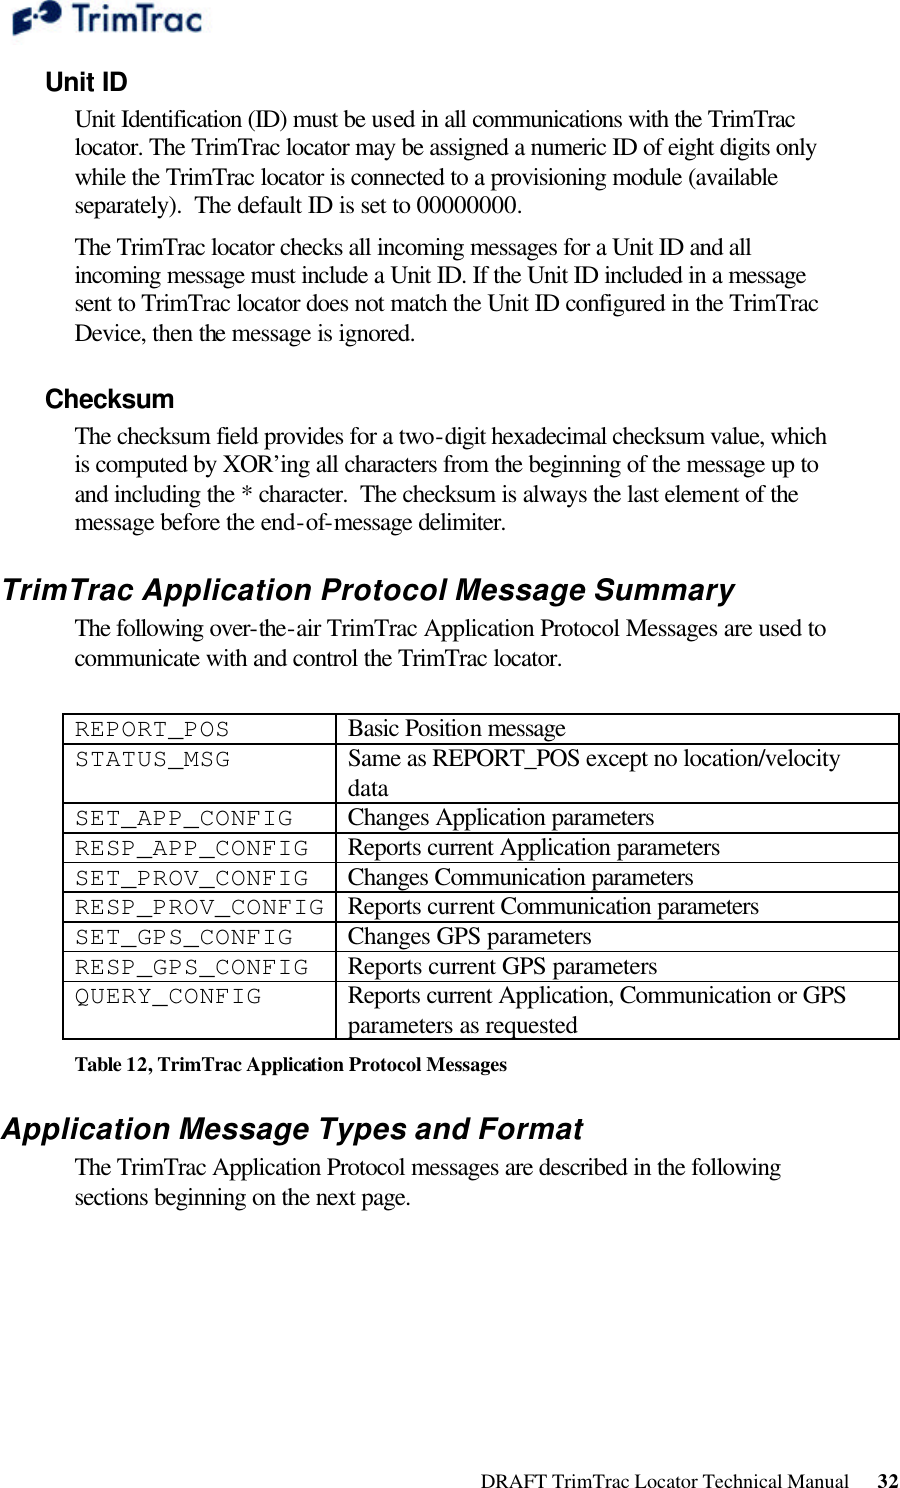  DRAFT TrimTrac Locator Technical Manual      32 Unit ID Unit Identification (ID) must be used in all communications with the TrimTrac locator. The TrimTrac locator may be assigned a numeric ID of eight digits only while the TrimTrac locator is connected to a provisioning module (available separately).  The default ID is set to 00000000.  The TrimTrac locator checks all incoming messages for a Unit ID and all incoming message must include a Unit ID. If the Unit ID included in a message sent to TrimTrac locator does not match the Unit ID configured in the TrimTrac Device, then the message is ignored. Checksum The checksum field provides for a two-digit hexadecimal checksum value, which is computed by XOR’ing all characters from the beginning of the message up to and including the * character.  The checksum is always the last element of the message before the end-of-message delimiter.  TrimTrac Application Protocol Message Summary The following over-the-air TrimTrac Application Protocol Messages are used to communicate with and control the TrimTrac locator.  REPORT_POS Basic Position message STATUS_MSG Same as REPORT_POS except no location/velocity data SET_APP_CONFIG Changes Application parameters RESP_APP_CONFIG Reports current Application parameters SET_PROV_CONFIG Changes Communication parameters RESP_PROV_CONFIG Reports current Communication parameters SET_GPS_CONFIG Changes GPS parameters RESP_GPS_CONFIG Reports current GPS parameters QUERY_CONFIG Reports current Application, Communication or GPS parameters as requested Table 12, TrimTrac Application Protocol Messages Application Message Types and Format The TrimTrac Application Protocol messages are described in the following sections beginning on the next page.  